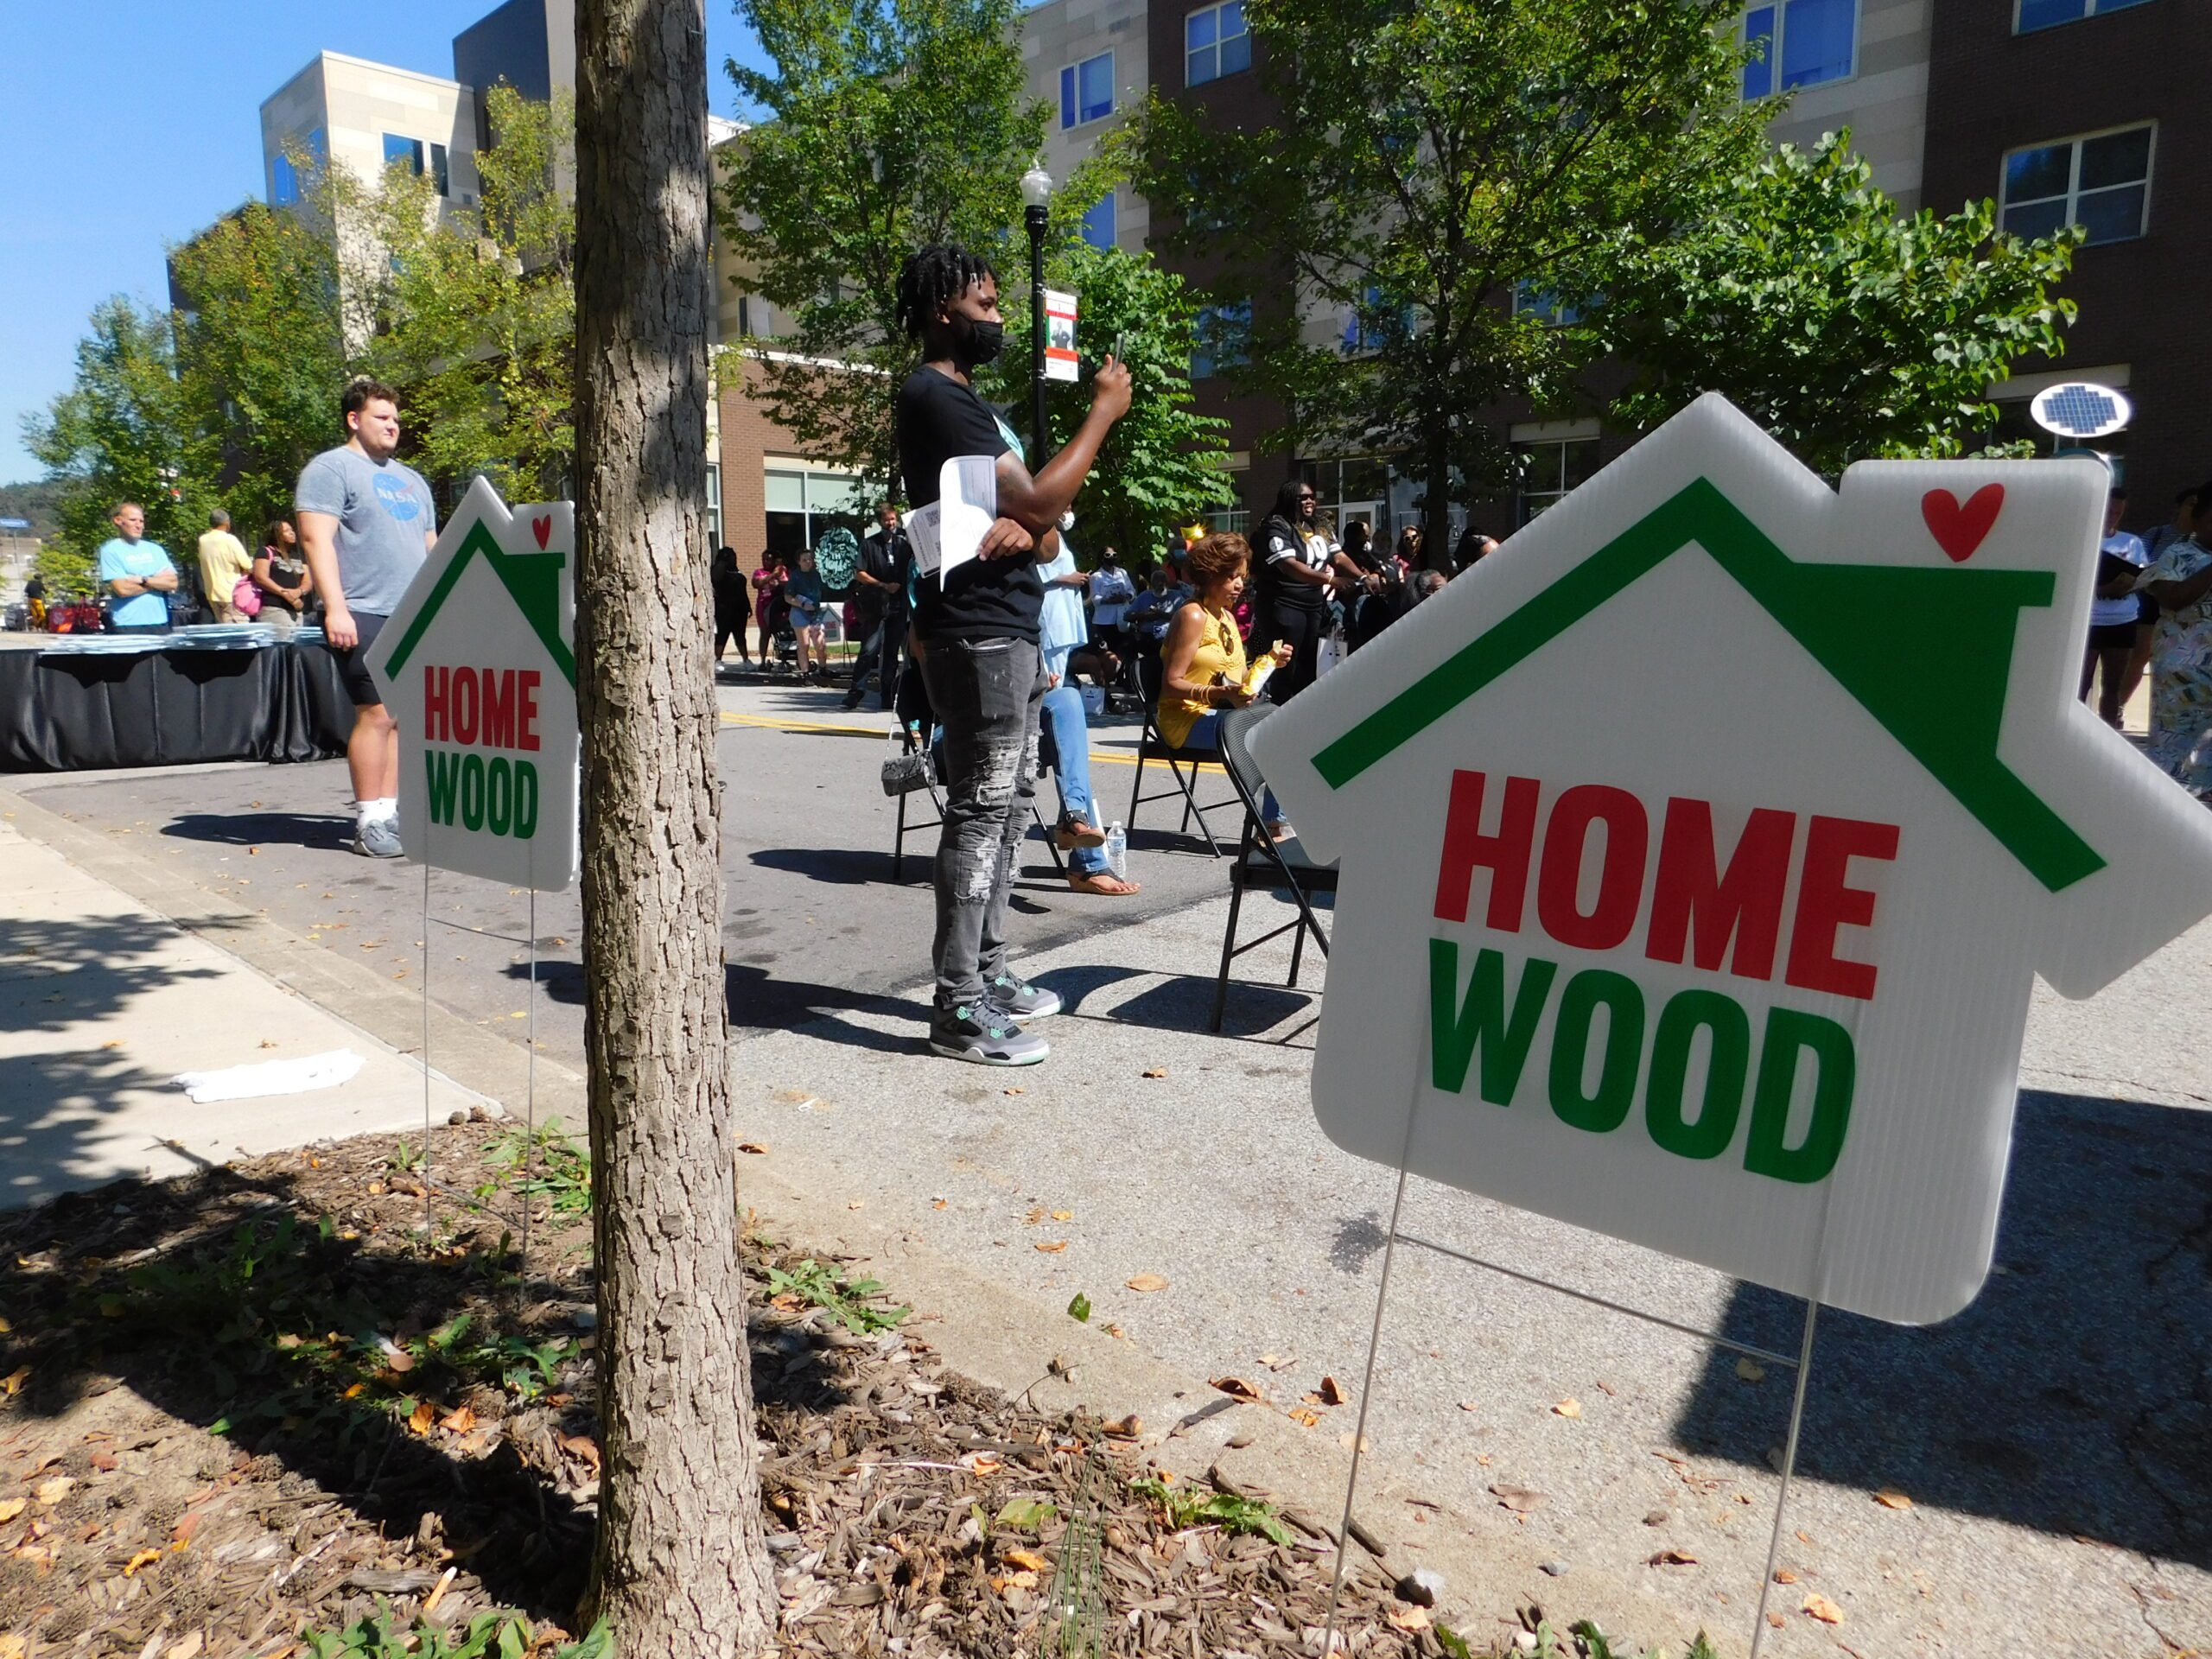 Homewood is Home | The Homewood Experience Comes to Life at Unveiling Event